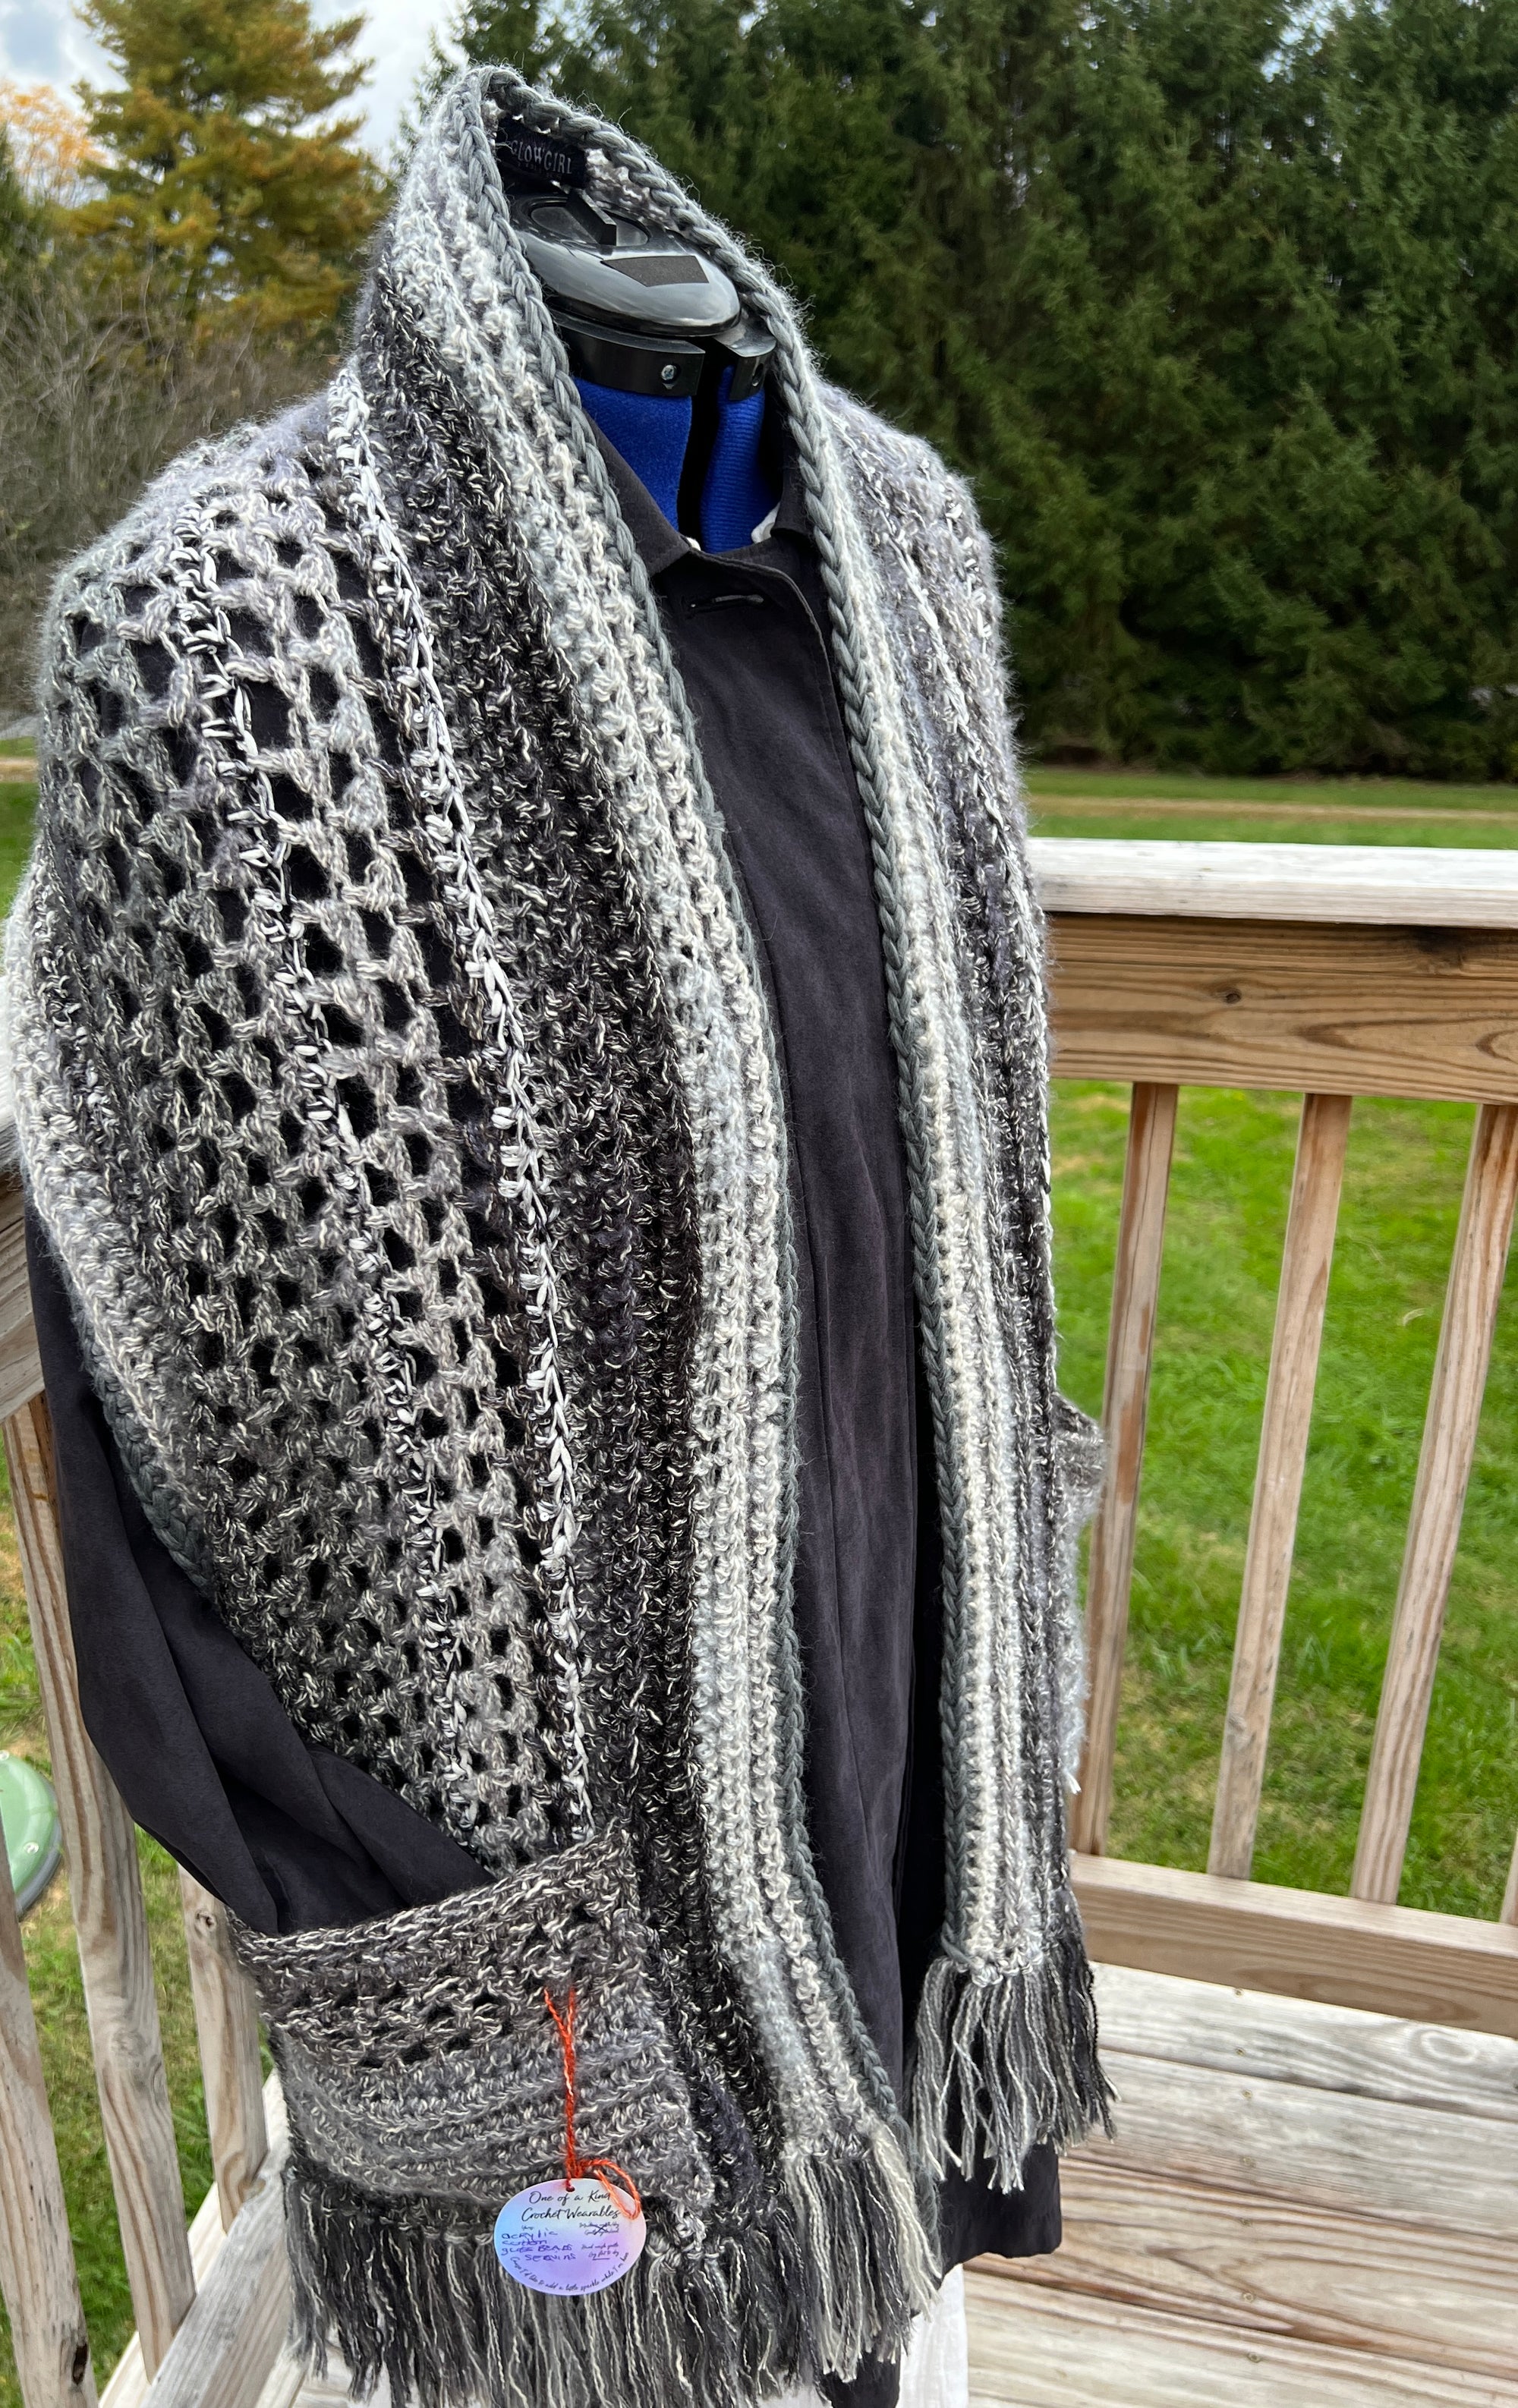 Pocket Shawl Gray and Silver Sparkle